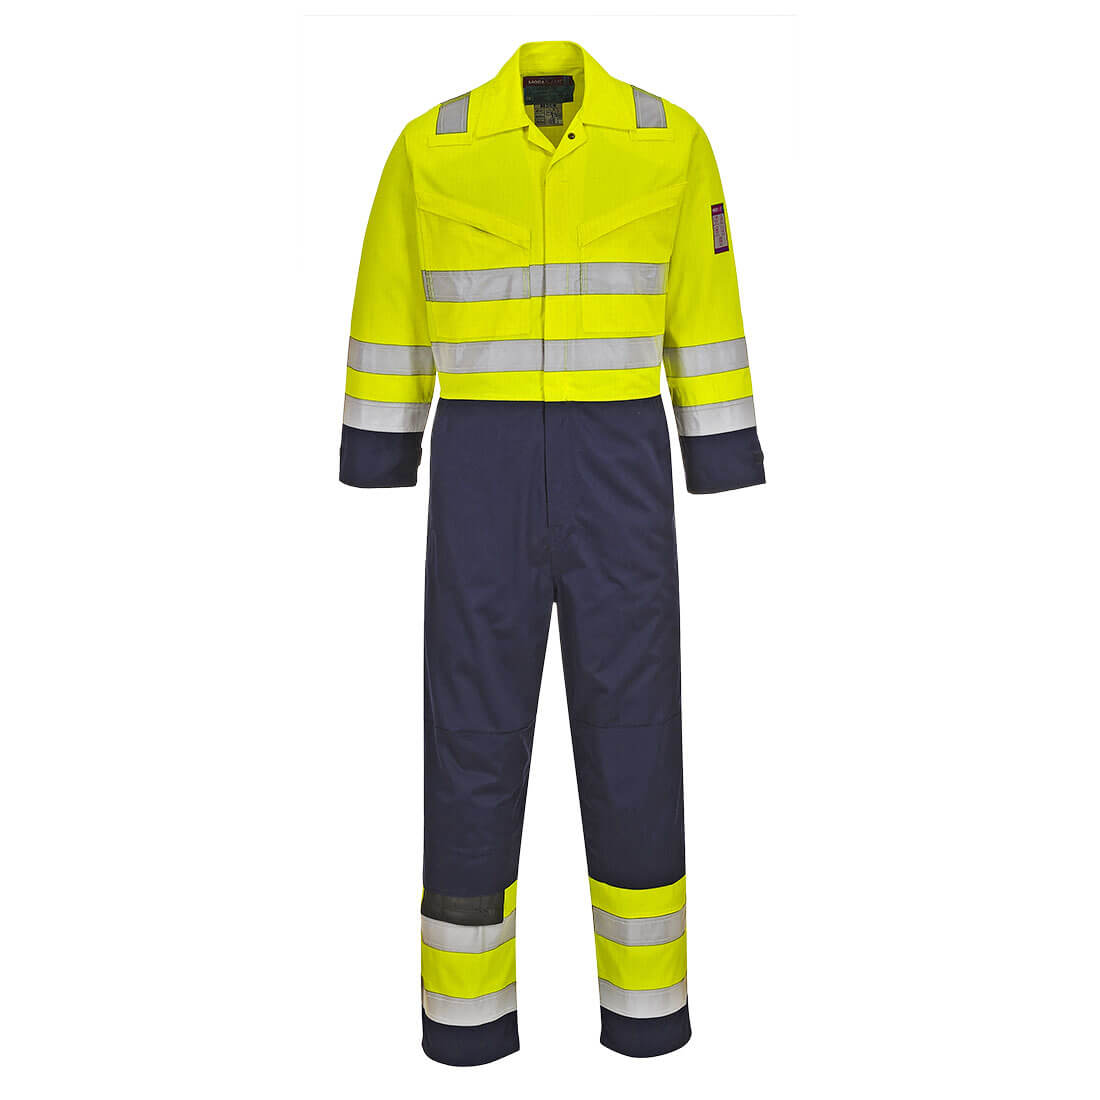 Image of Modaflame Flame Resistant Hi Vis Overall Yellow / Navy L 32"